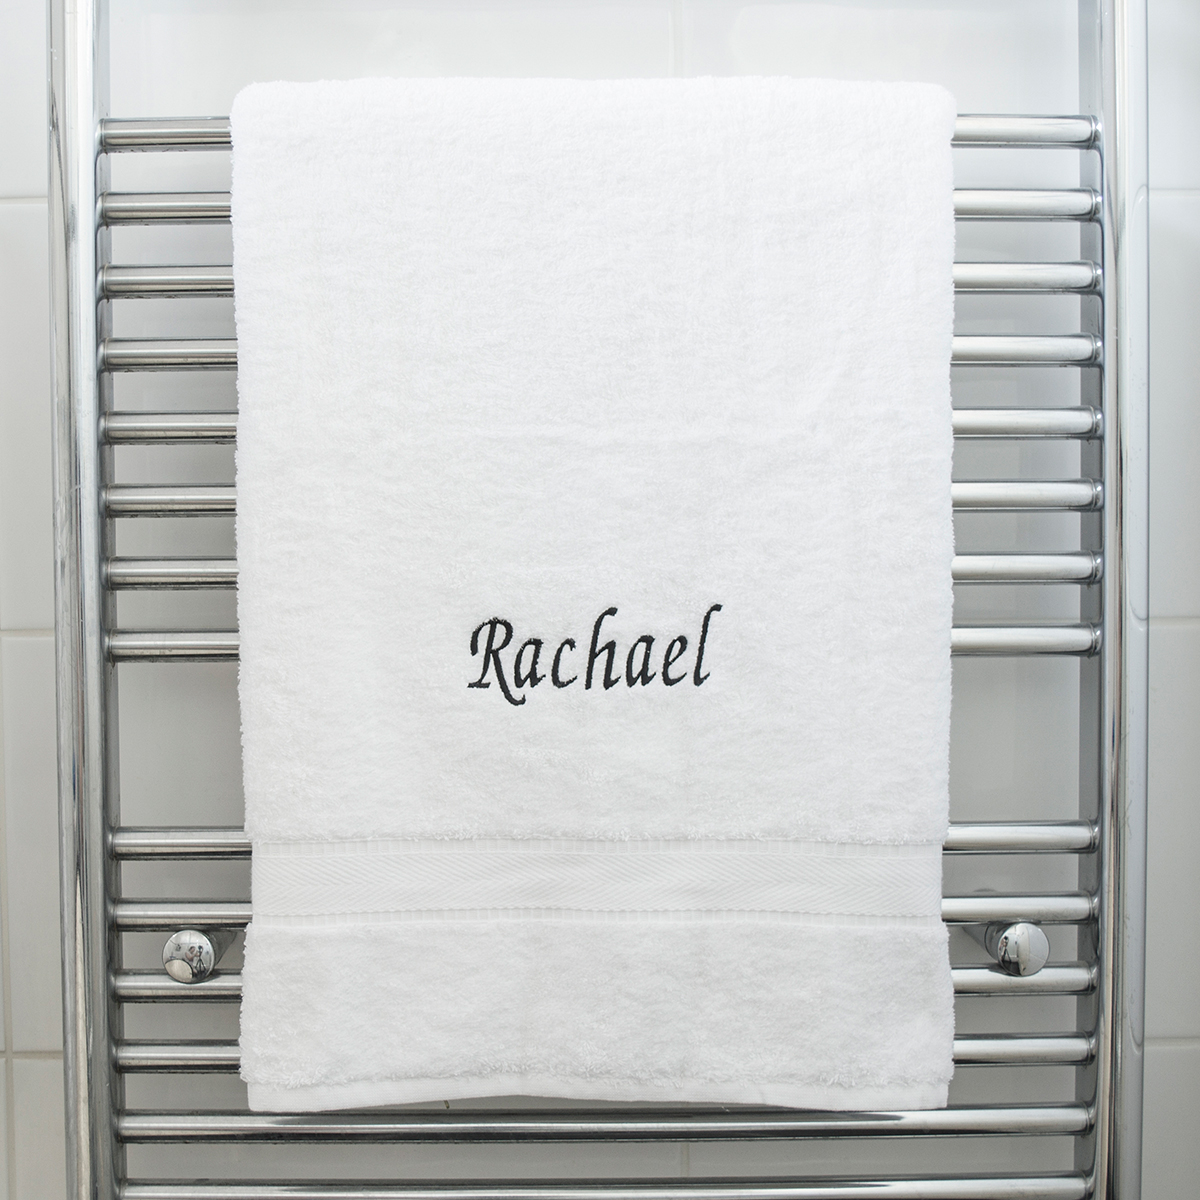 Personalised Bath Towel - For Her